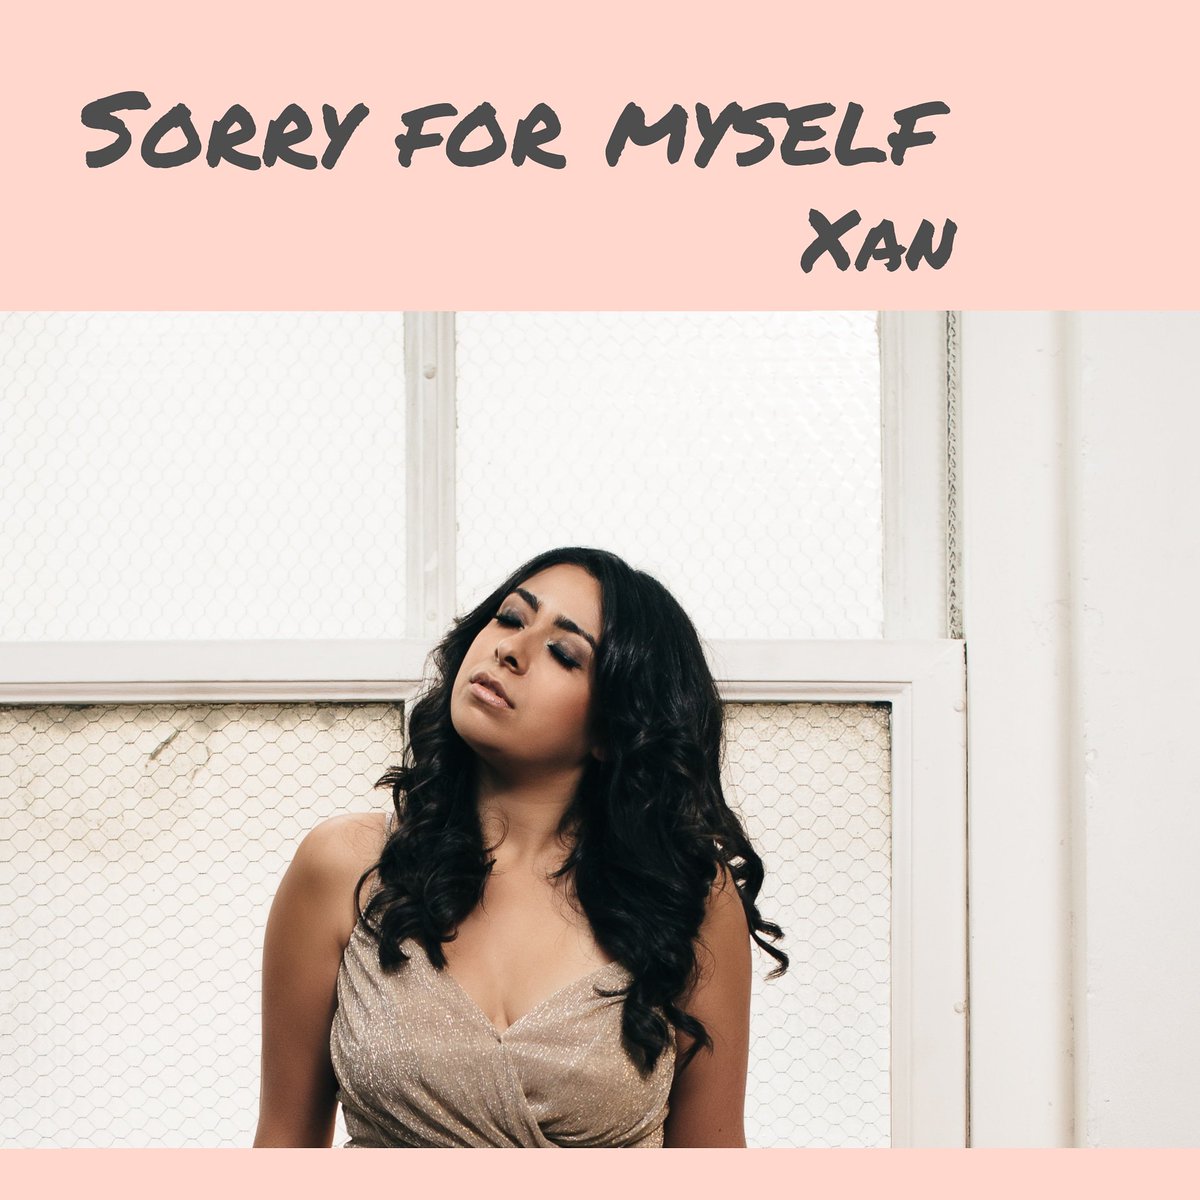 Feeling sorry for yourself this morning? I have the perfect pick-me-up! #sorryformyself available on all major streaming platforms! #xan #pop #popsinger #itunes #amazonmusic #amazon #napster #napstermusic #iheartradio #singer #singersongwriter #newartist #originalmusic #spotify